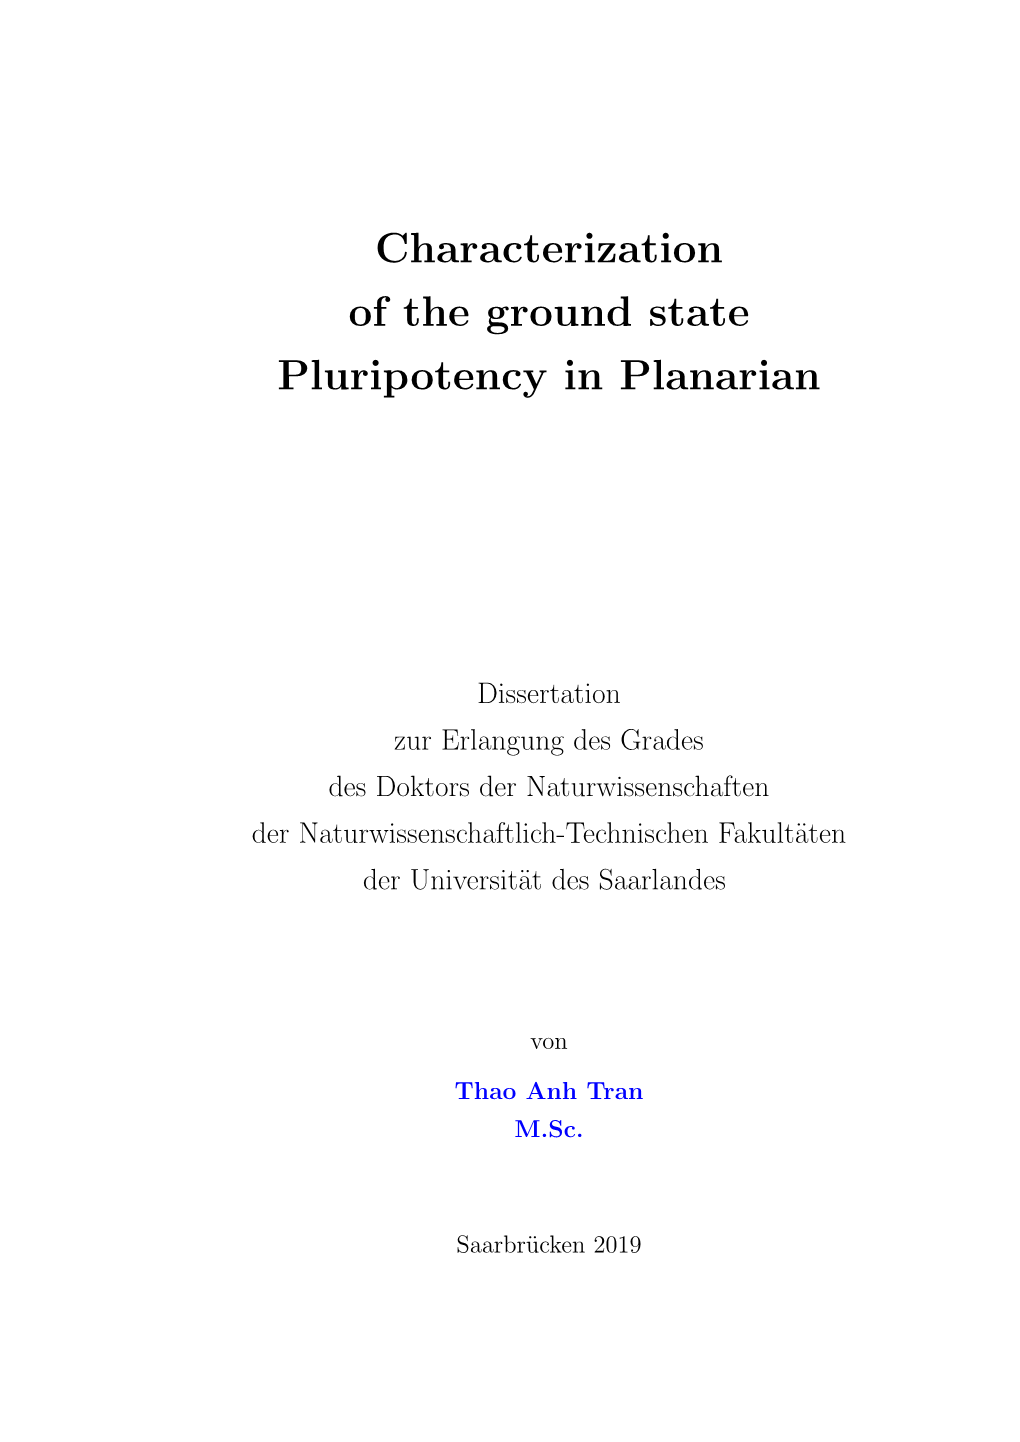 Characterization of the Ground State Pluripotency in Planarian